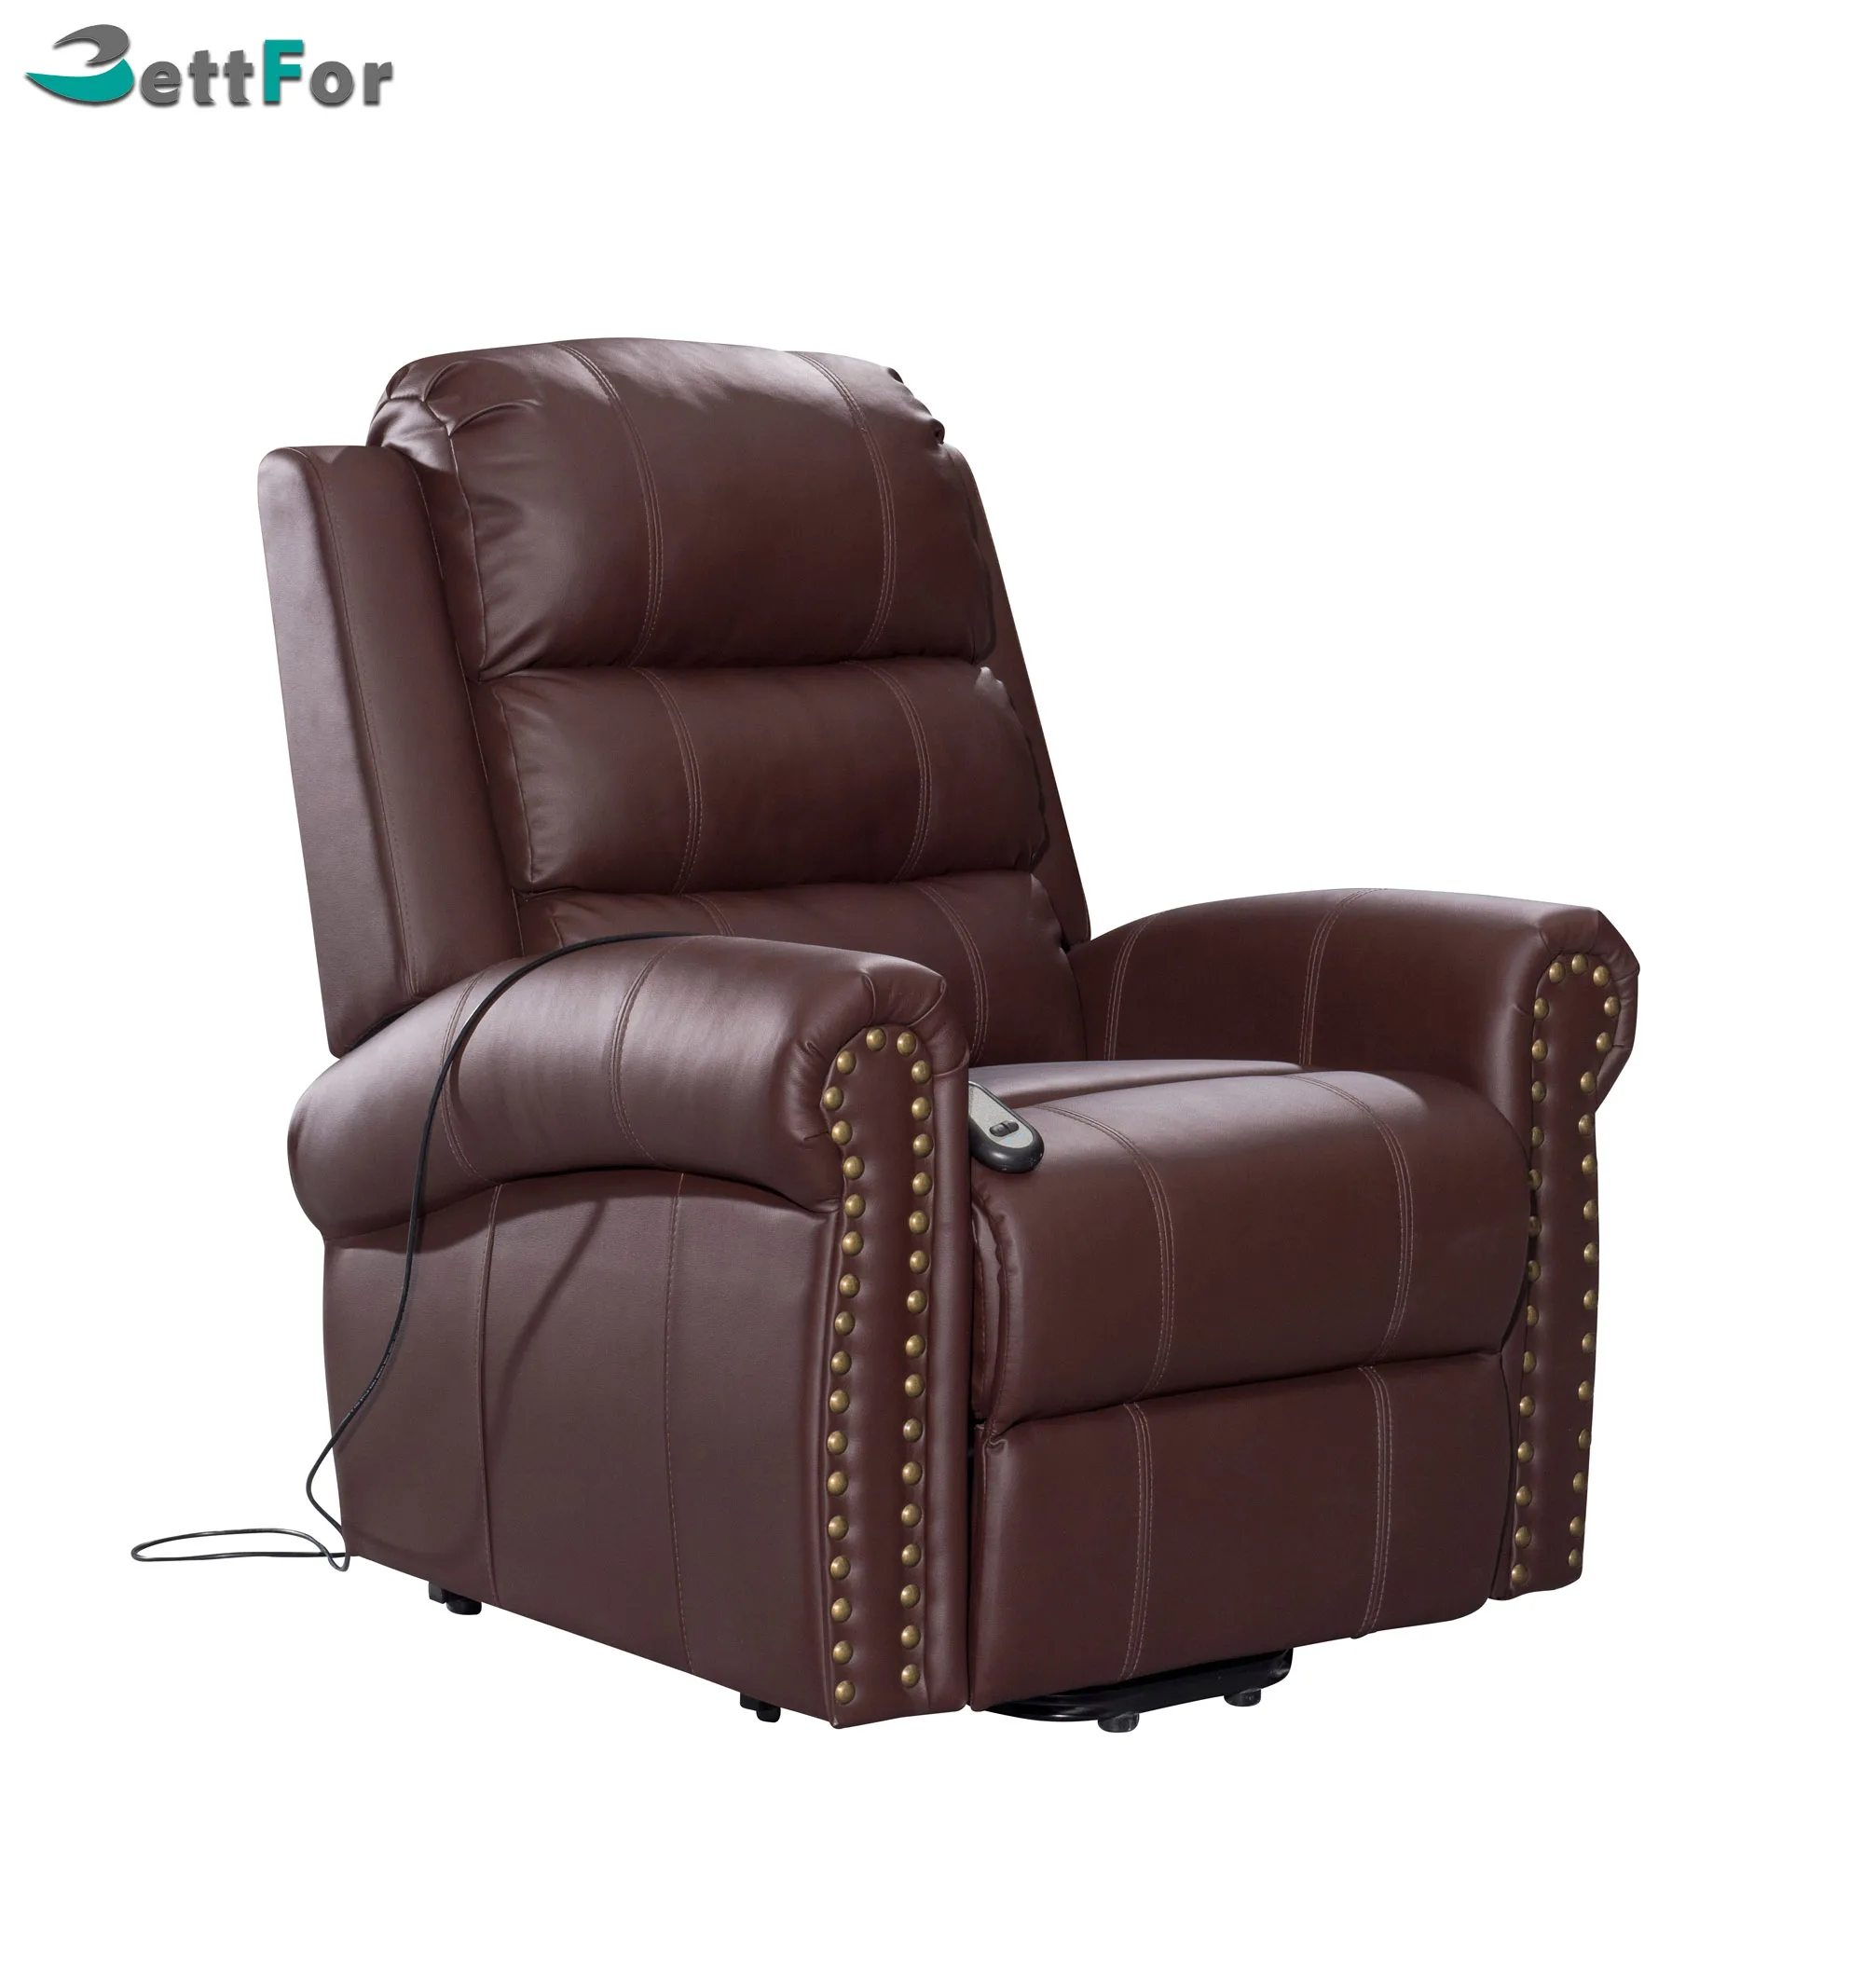 Electric Recliner Chair Leather Blc 750 Buy Recliner Chair Leather